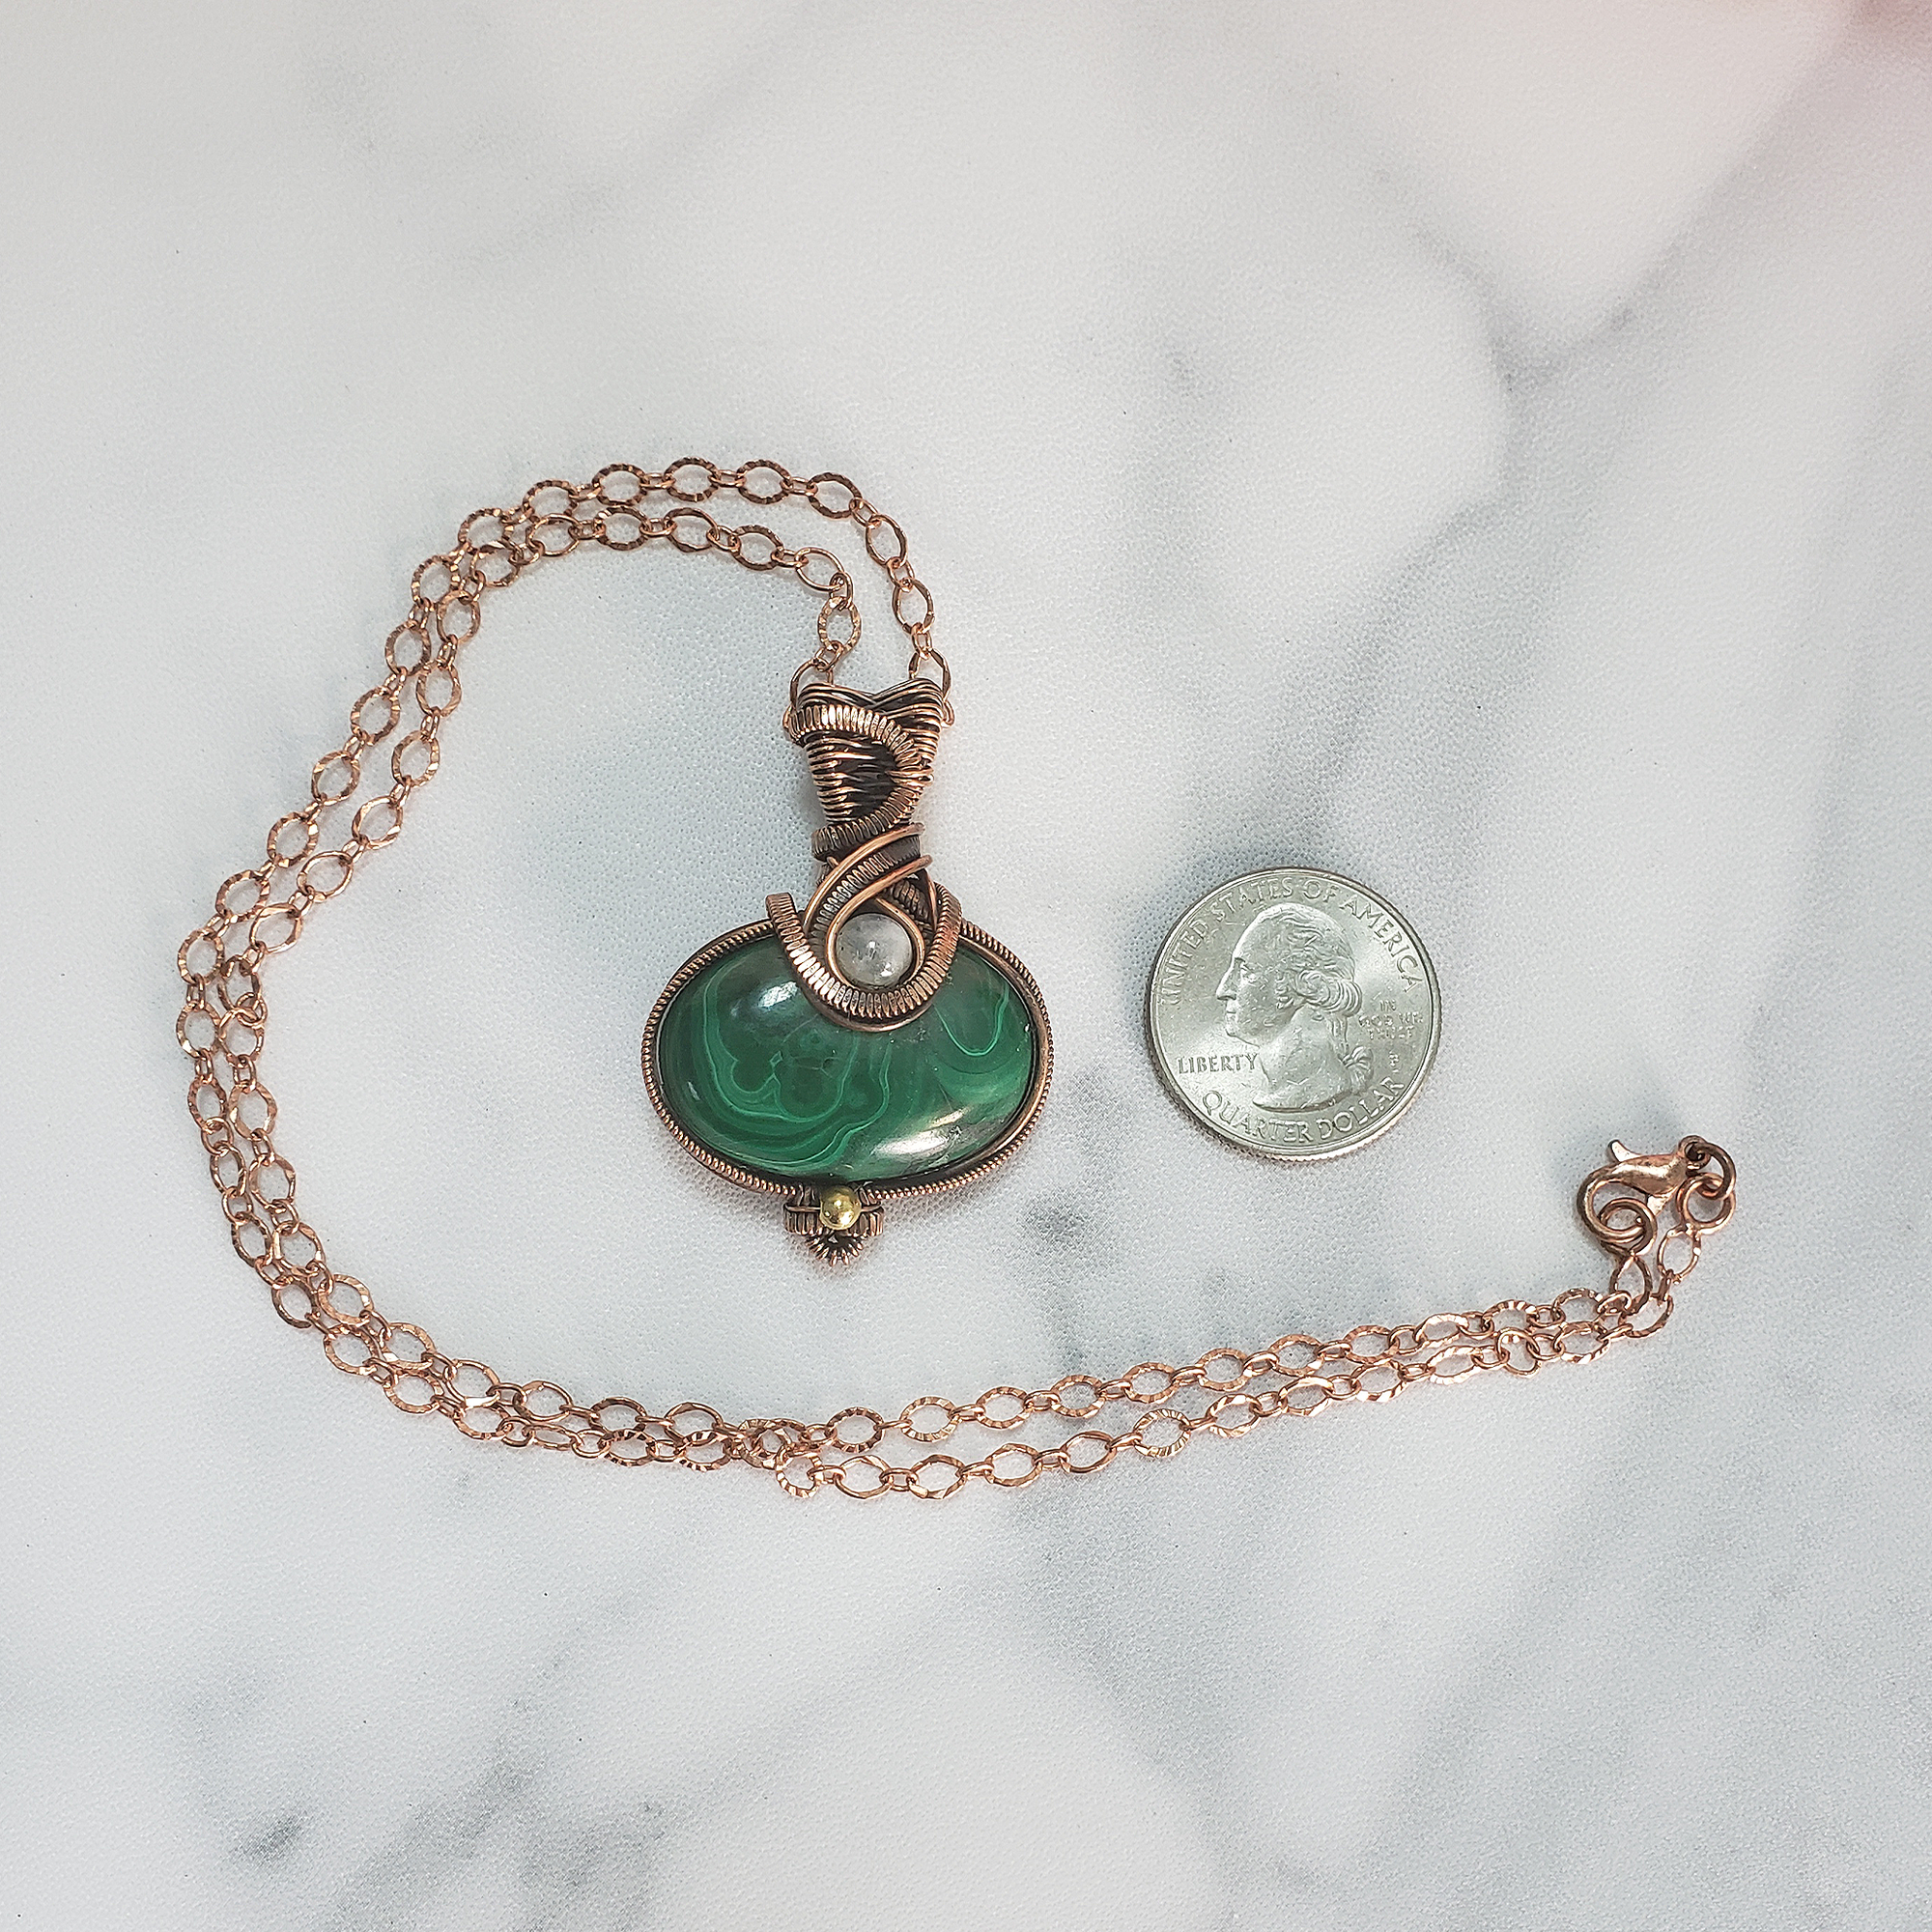 Malachite & Rainbow Moonstone Wire Wrapped Copper Pendant Necklace with Chain - Verdi - Handmade Wire Wrapped Jewelry